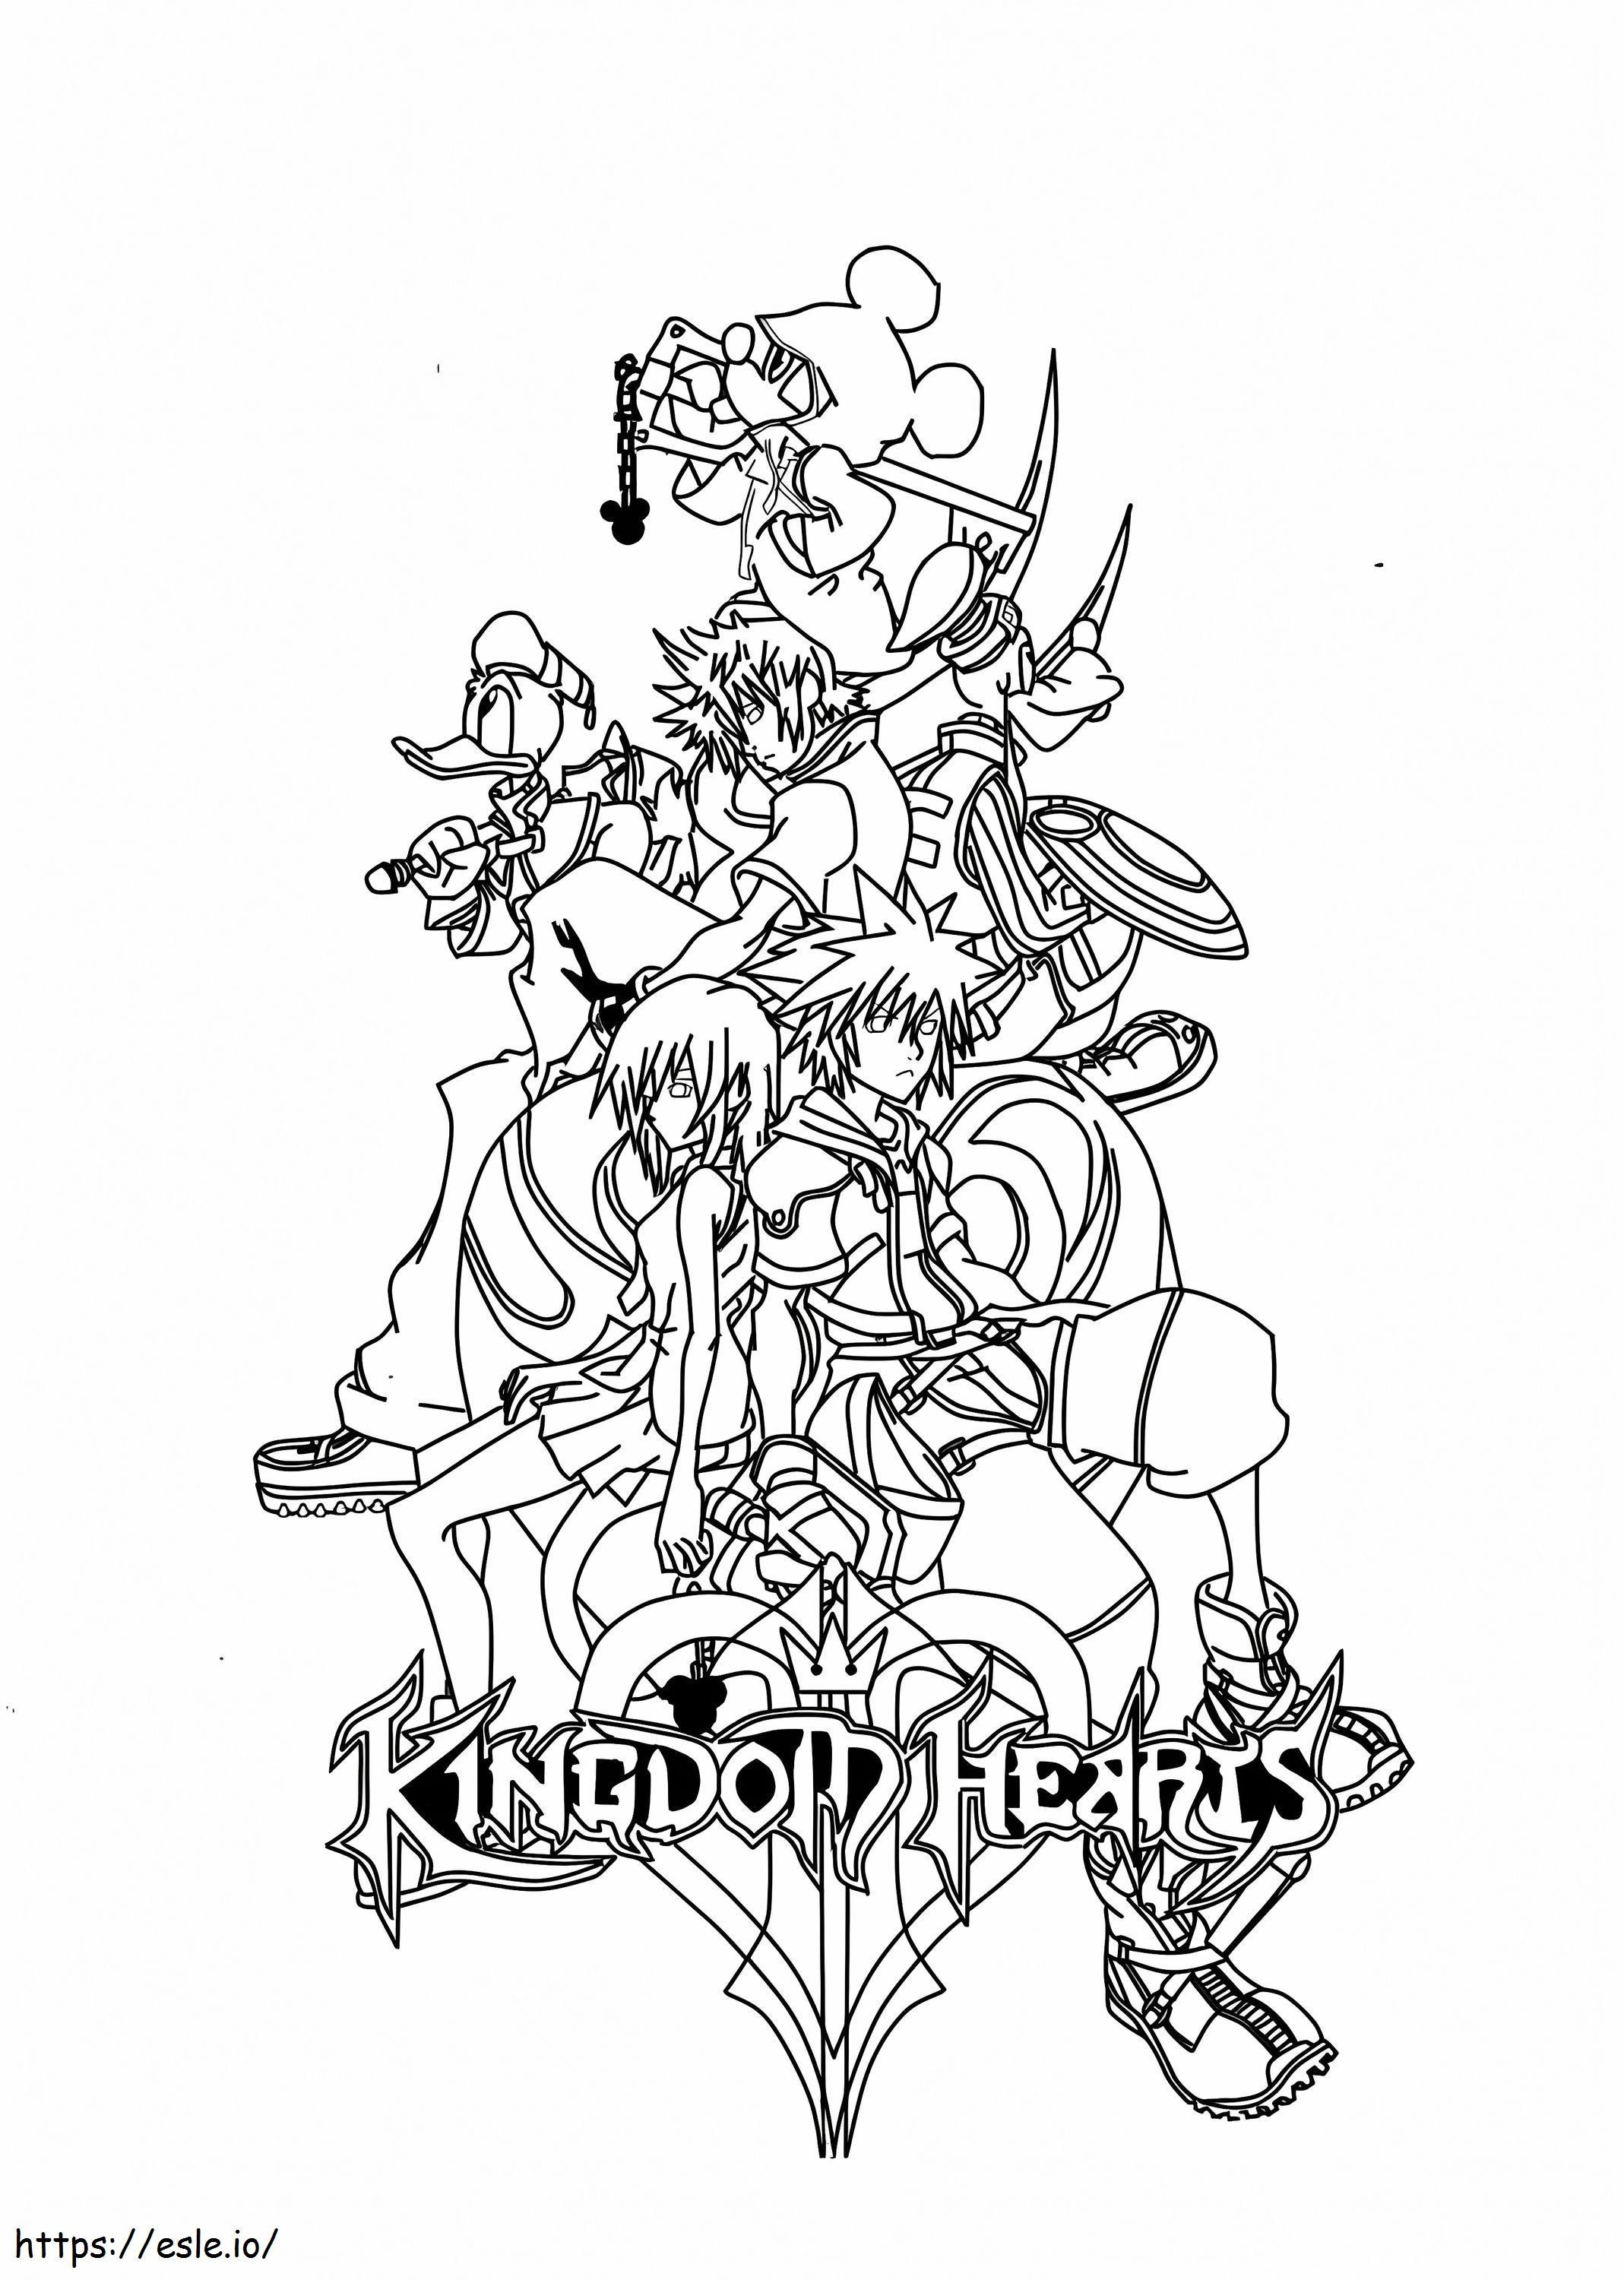 Characters From Kingdom Hearts coloring page